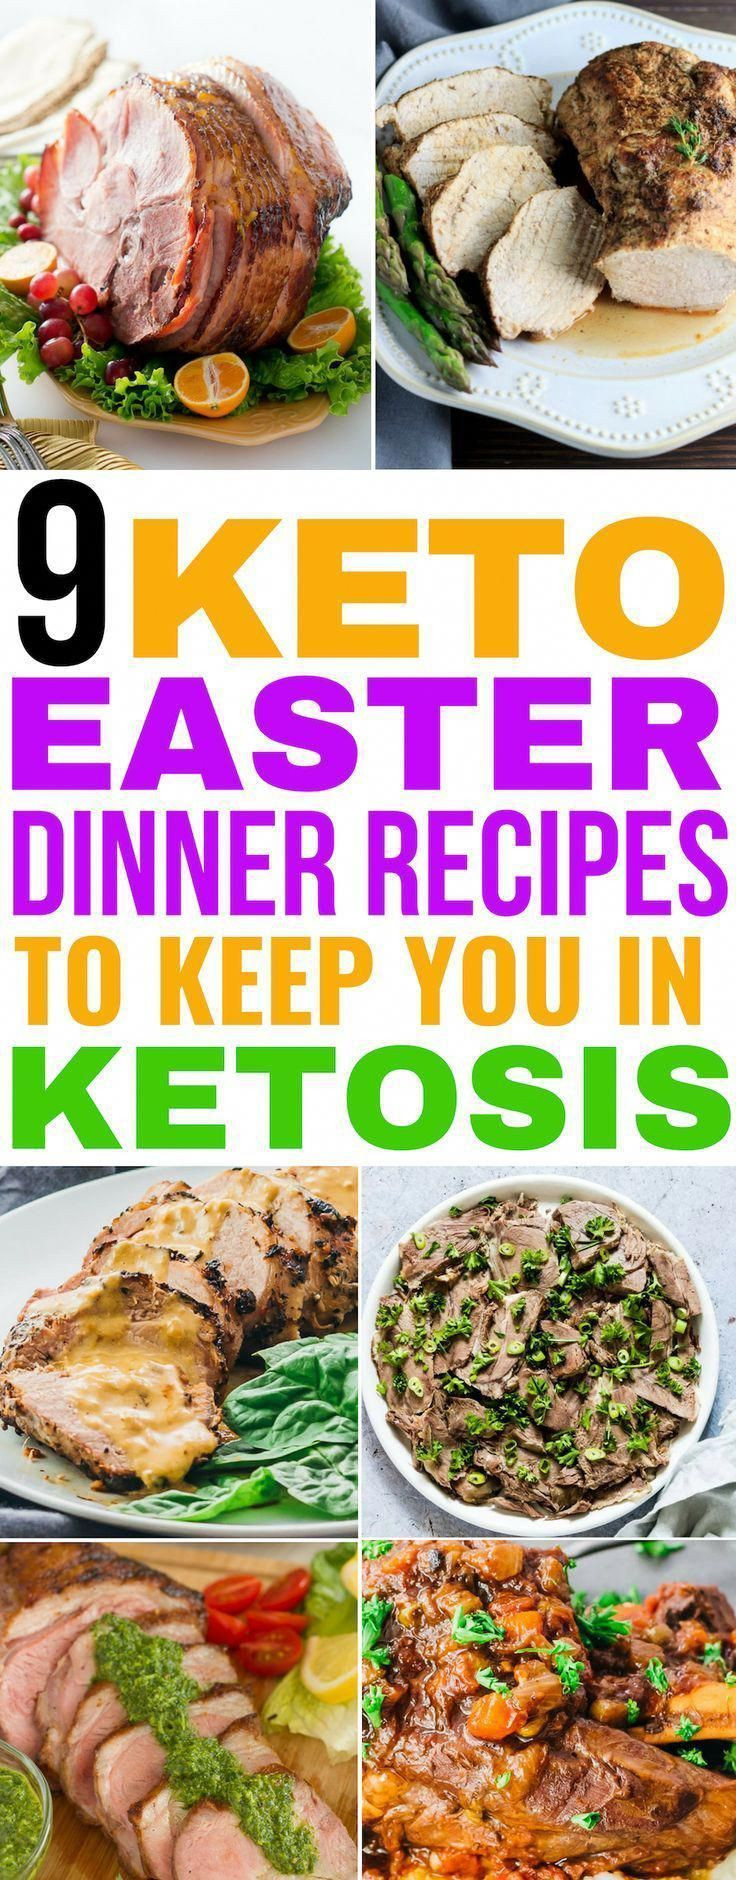 Keto Easter Dinner
 Keto Easter dinner recipes to keep you in ketosis These